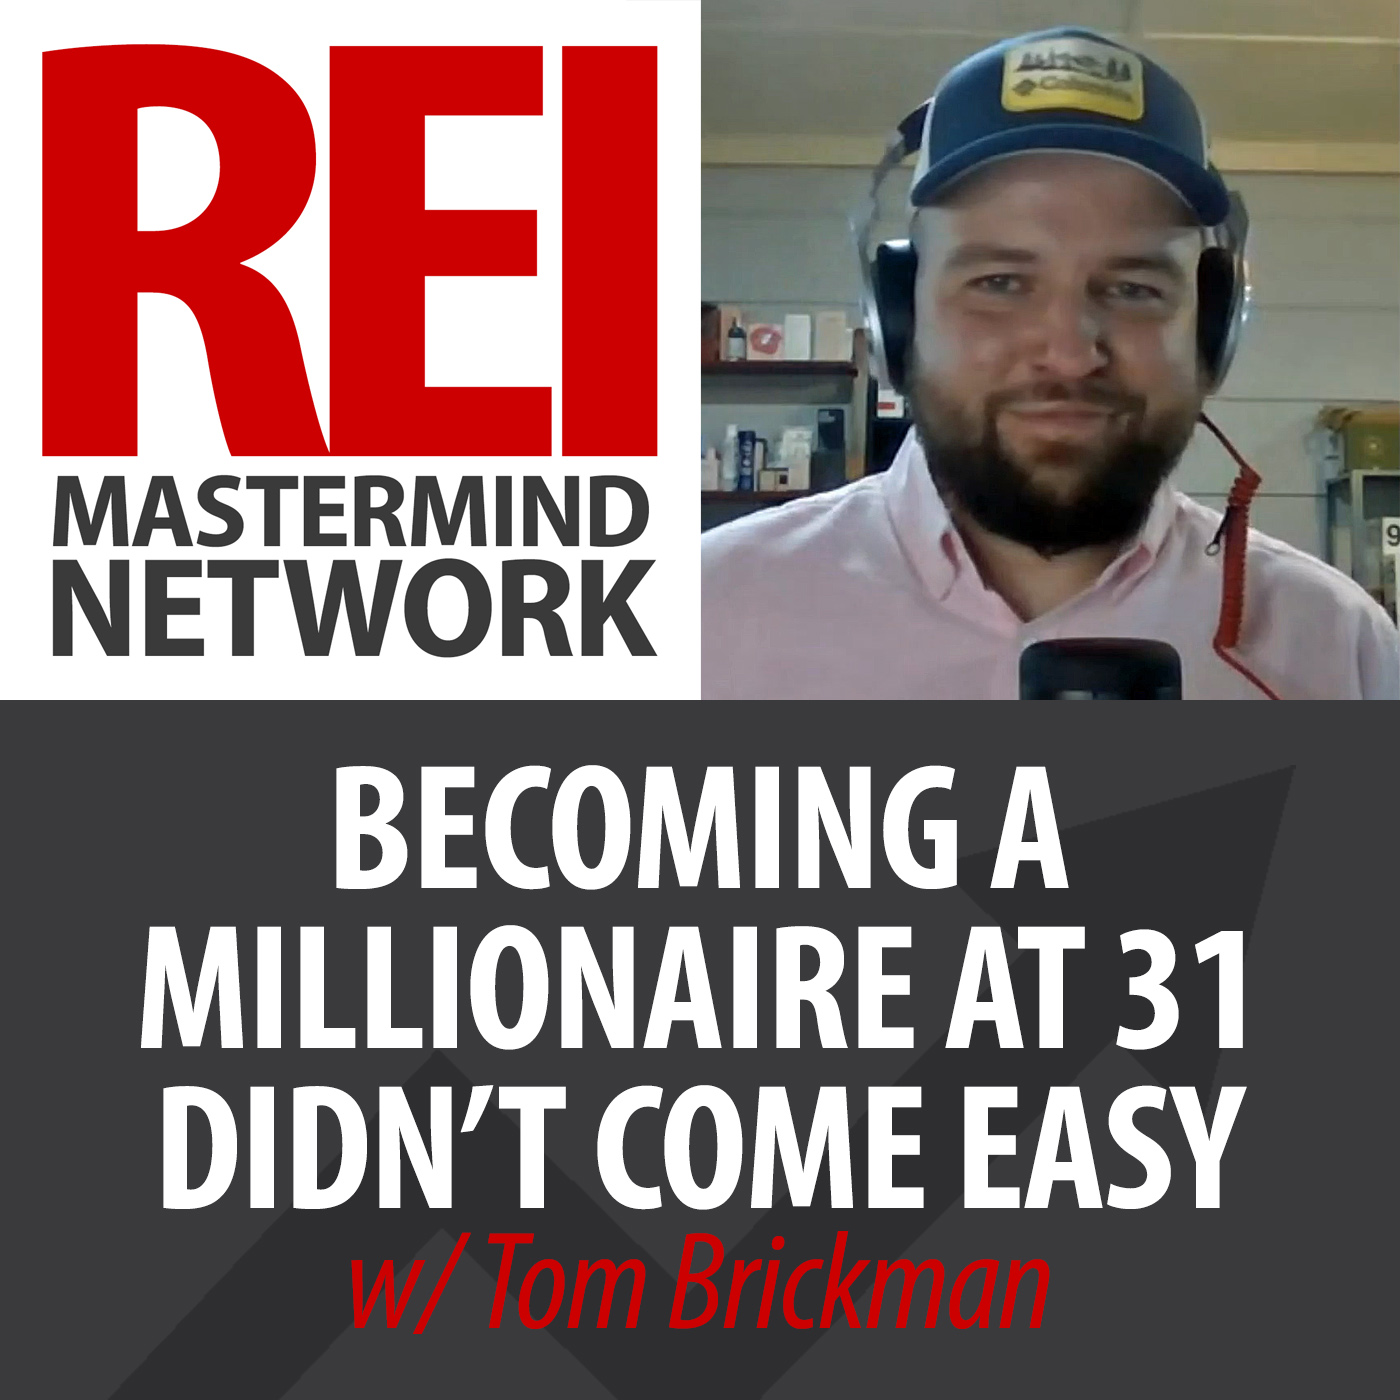 Becoming a Millionaire at 31 Didn't Come Easy with Tom Brickman Image